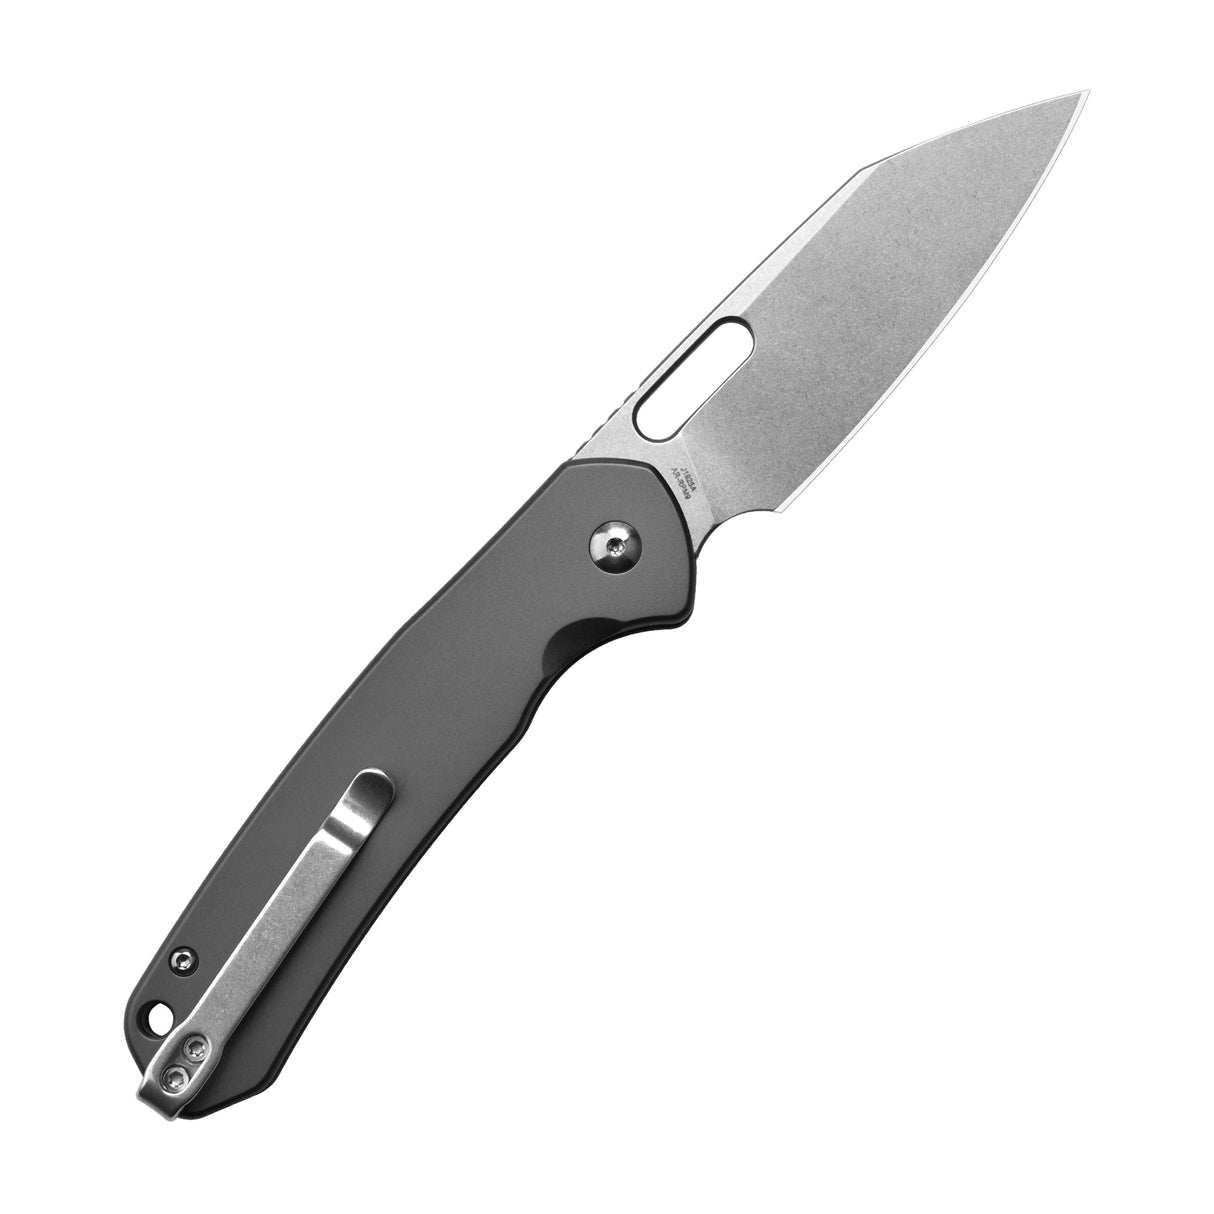 CJRB PYRITE WHARNCLIFFE J1925A AR-RPM9 POWDER STEEL BLADE STEEL HANDLE FOLDING KNIVES GRAY STEEL COLOR